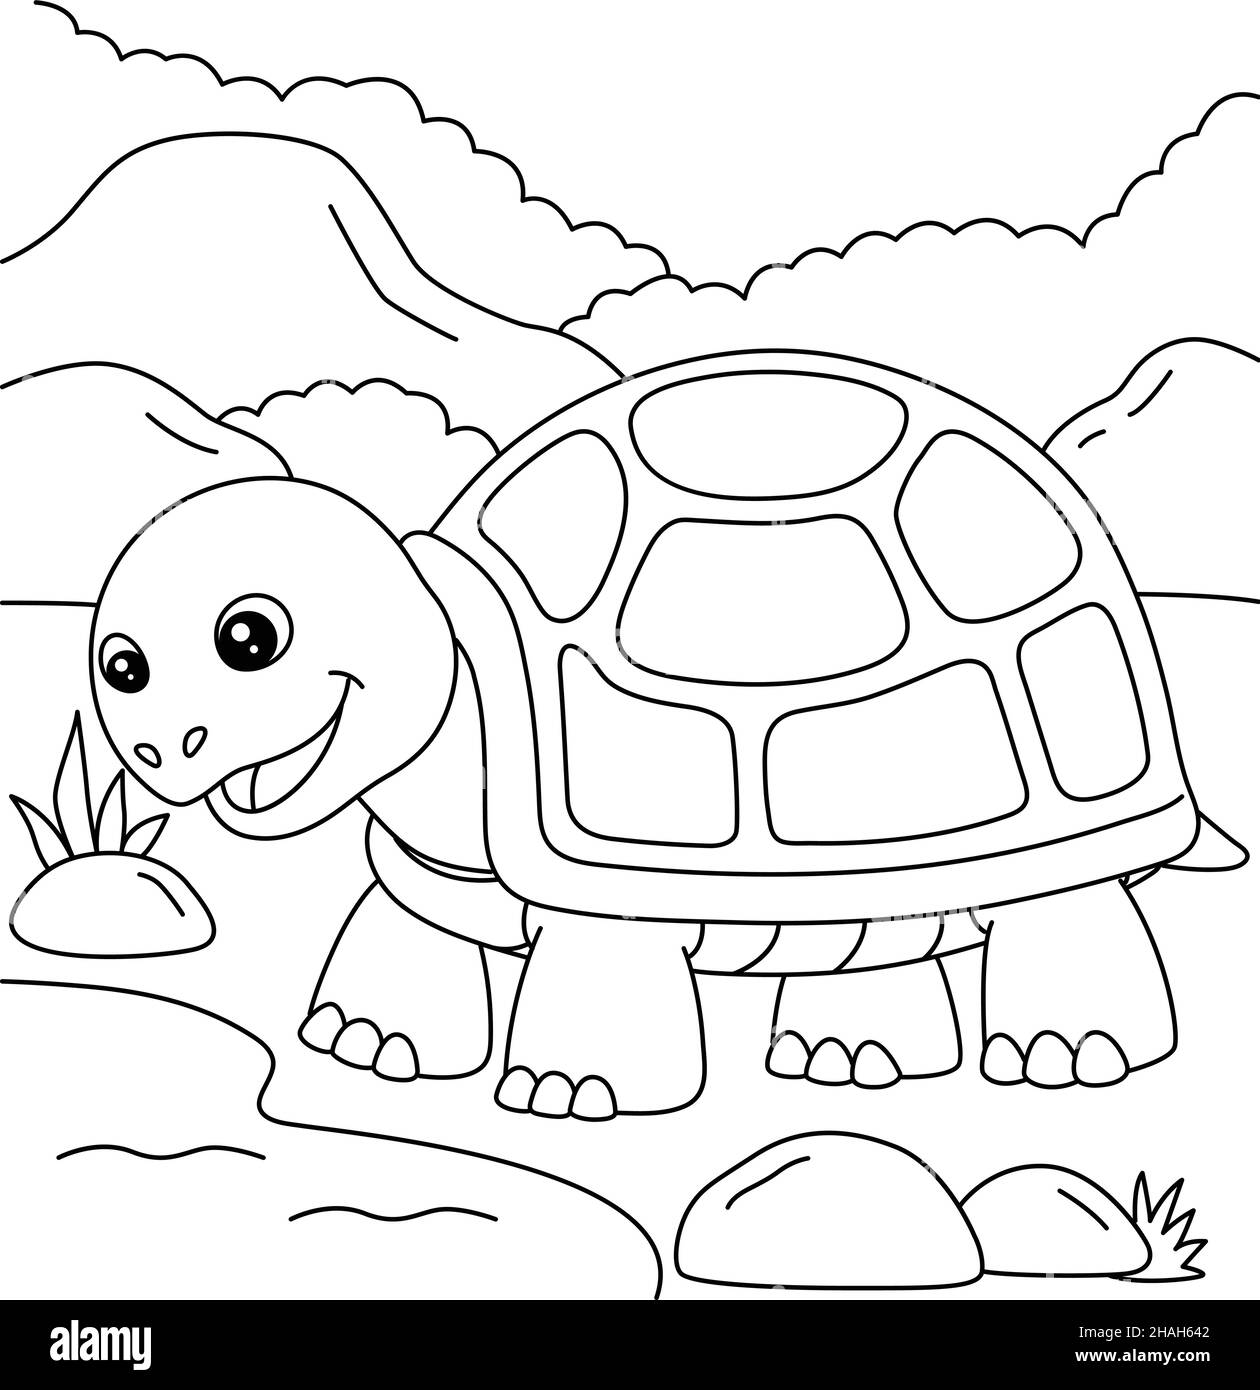 Turtle Coloring Page for Kids Stock Vector